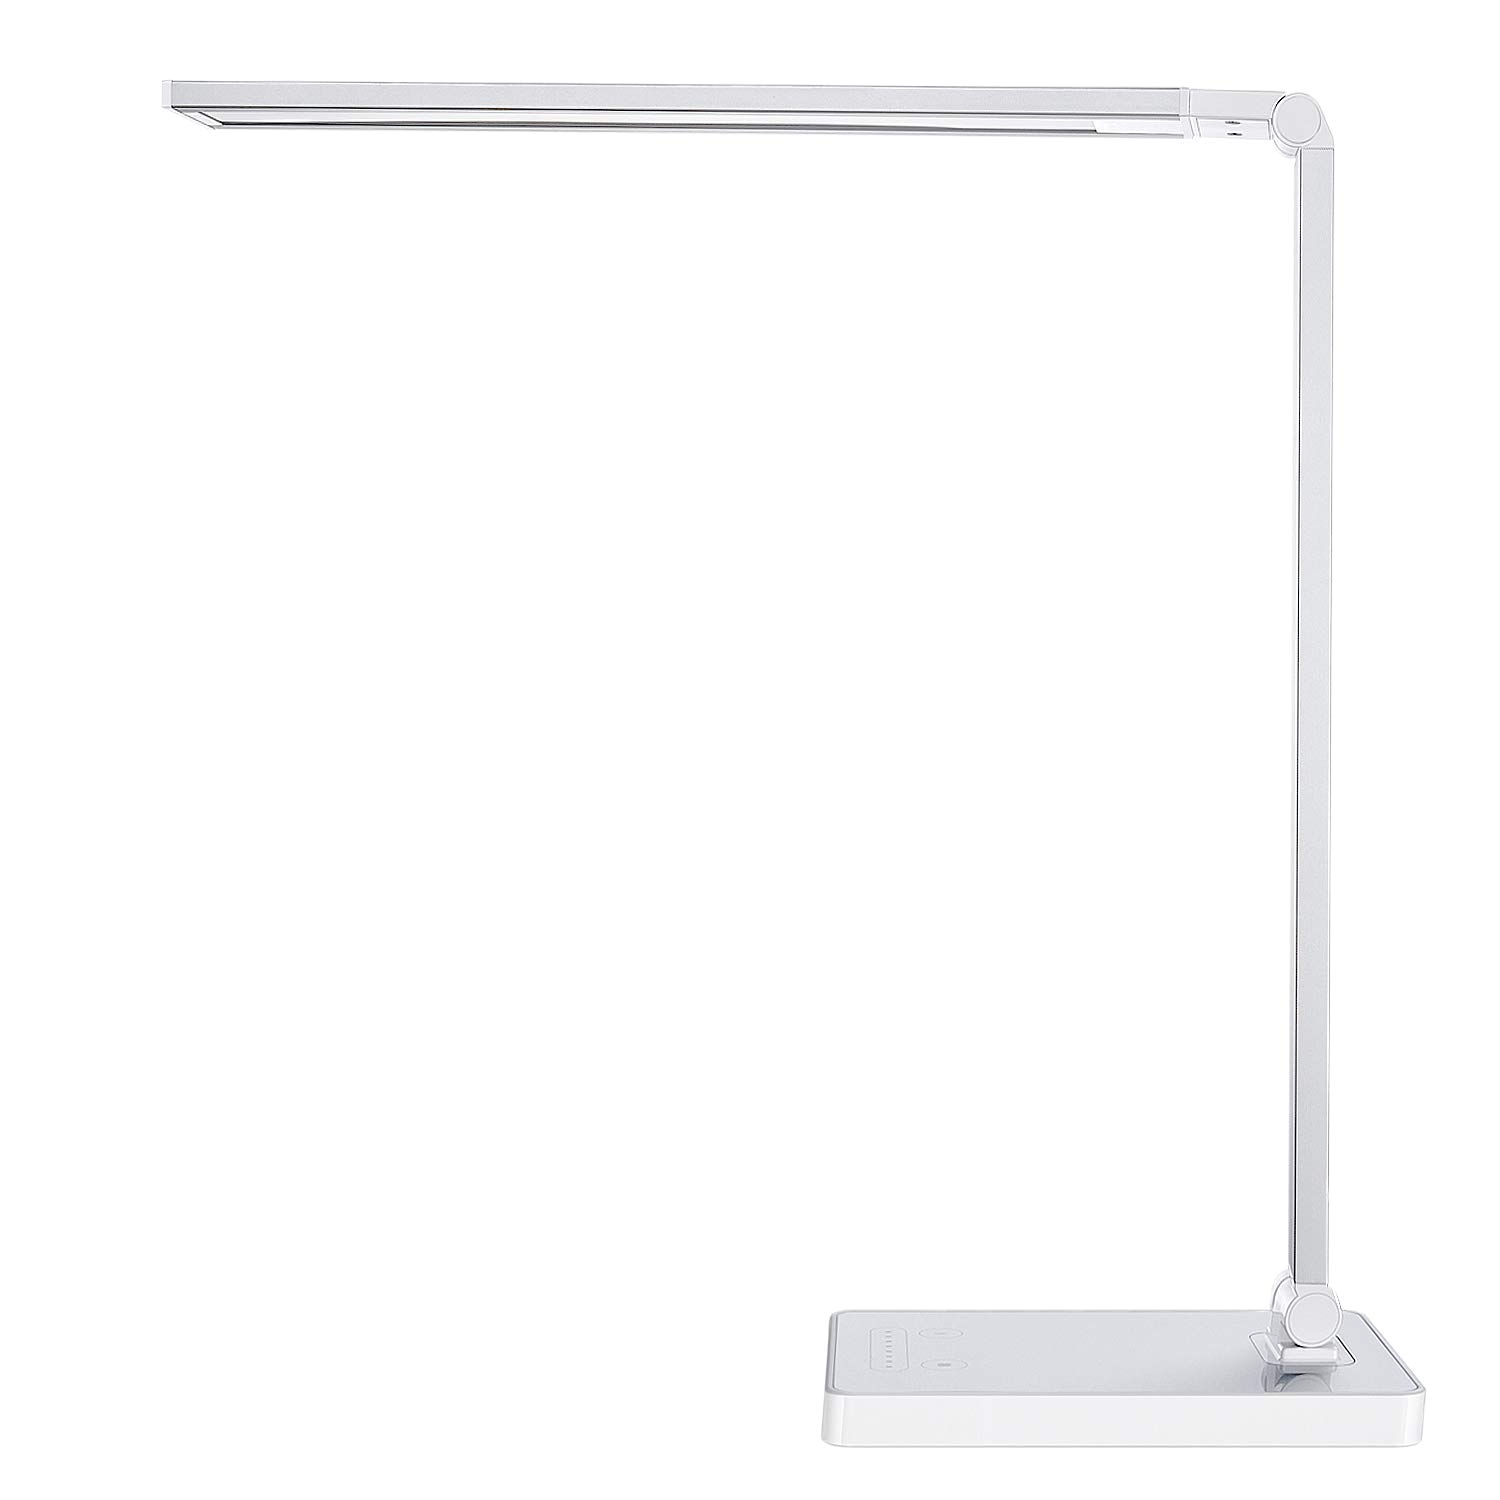 phive dimmable led desk lamp with fast charging usb port touch control 8 level dimmer 4 lighting modes aluminum body eye care led table lamp for